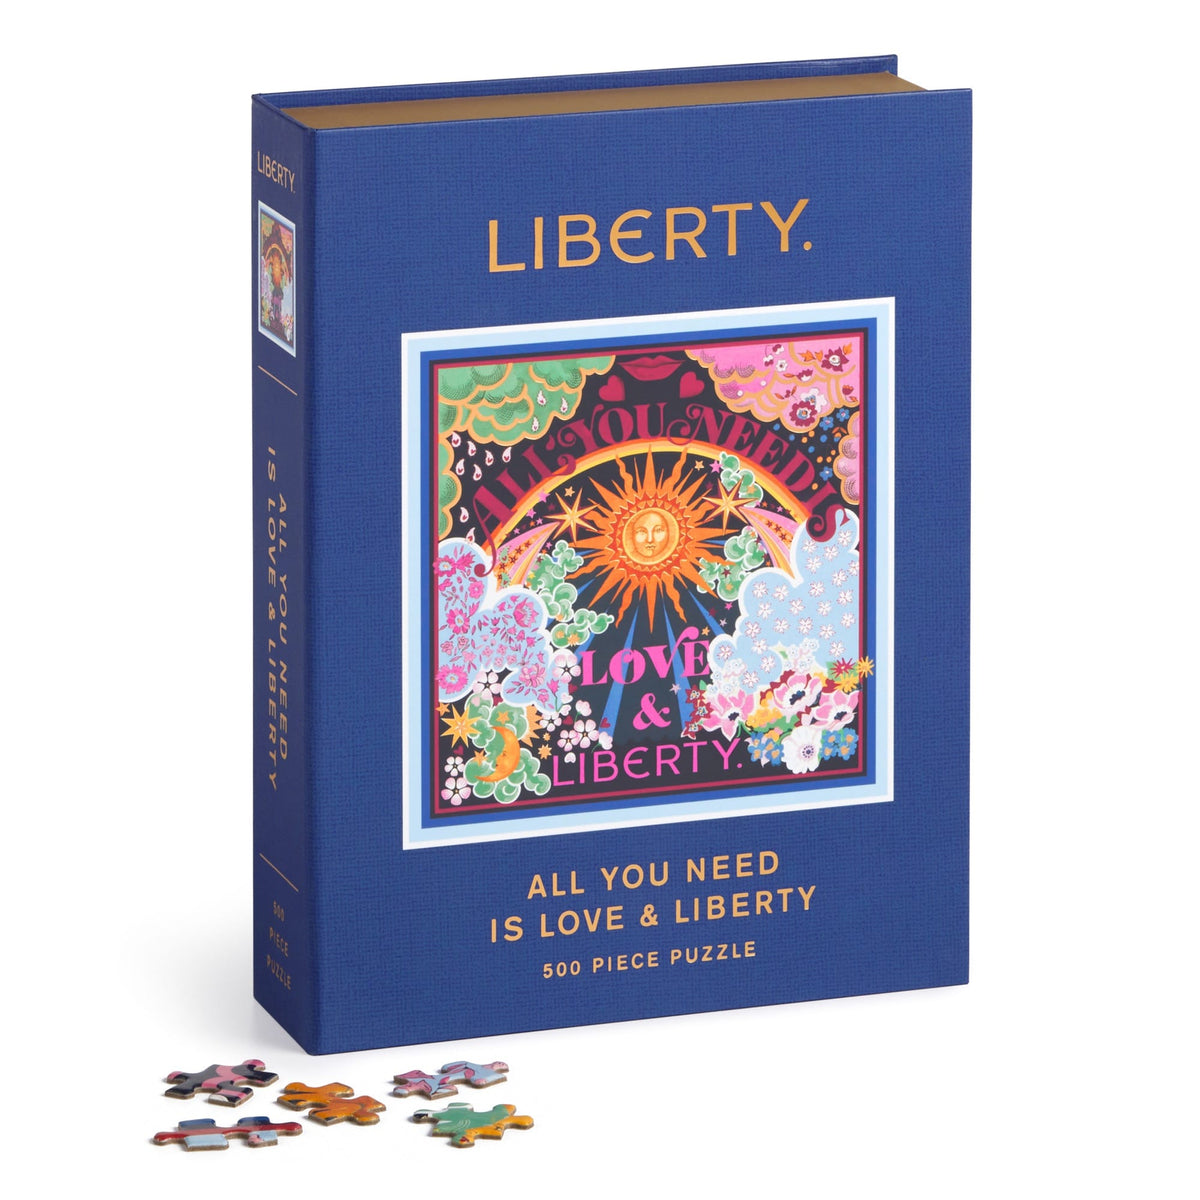 A jigsaw puzzle designed to look like a keepsake box with magnetic closure, titled &quot;Liberty All You Need is Love Puzzle&quot; featuring a colorful, Thorpe print design. It consists of the Liberty All You Need is Love 500 Piece Book Puzzle by Chronicle Books.